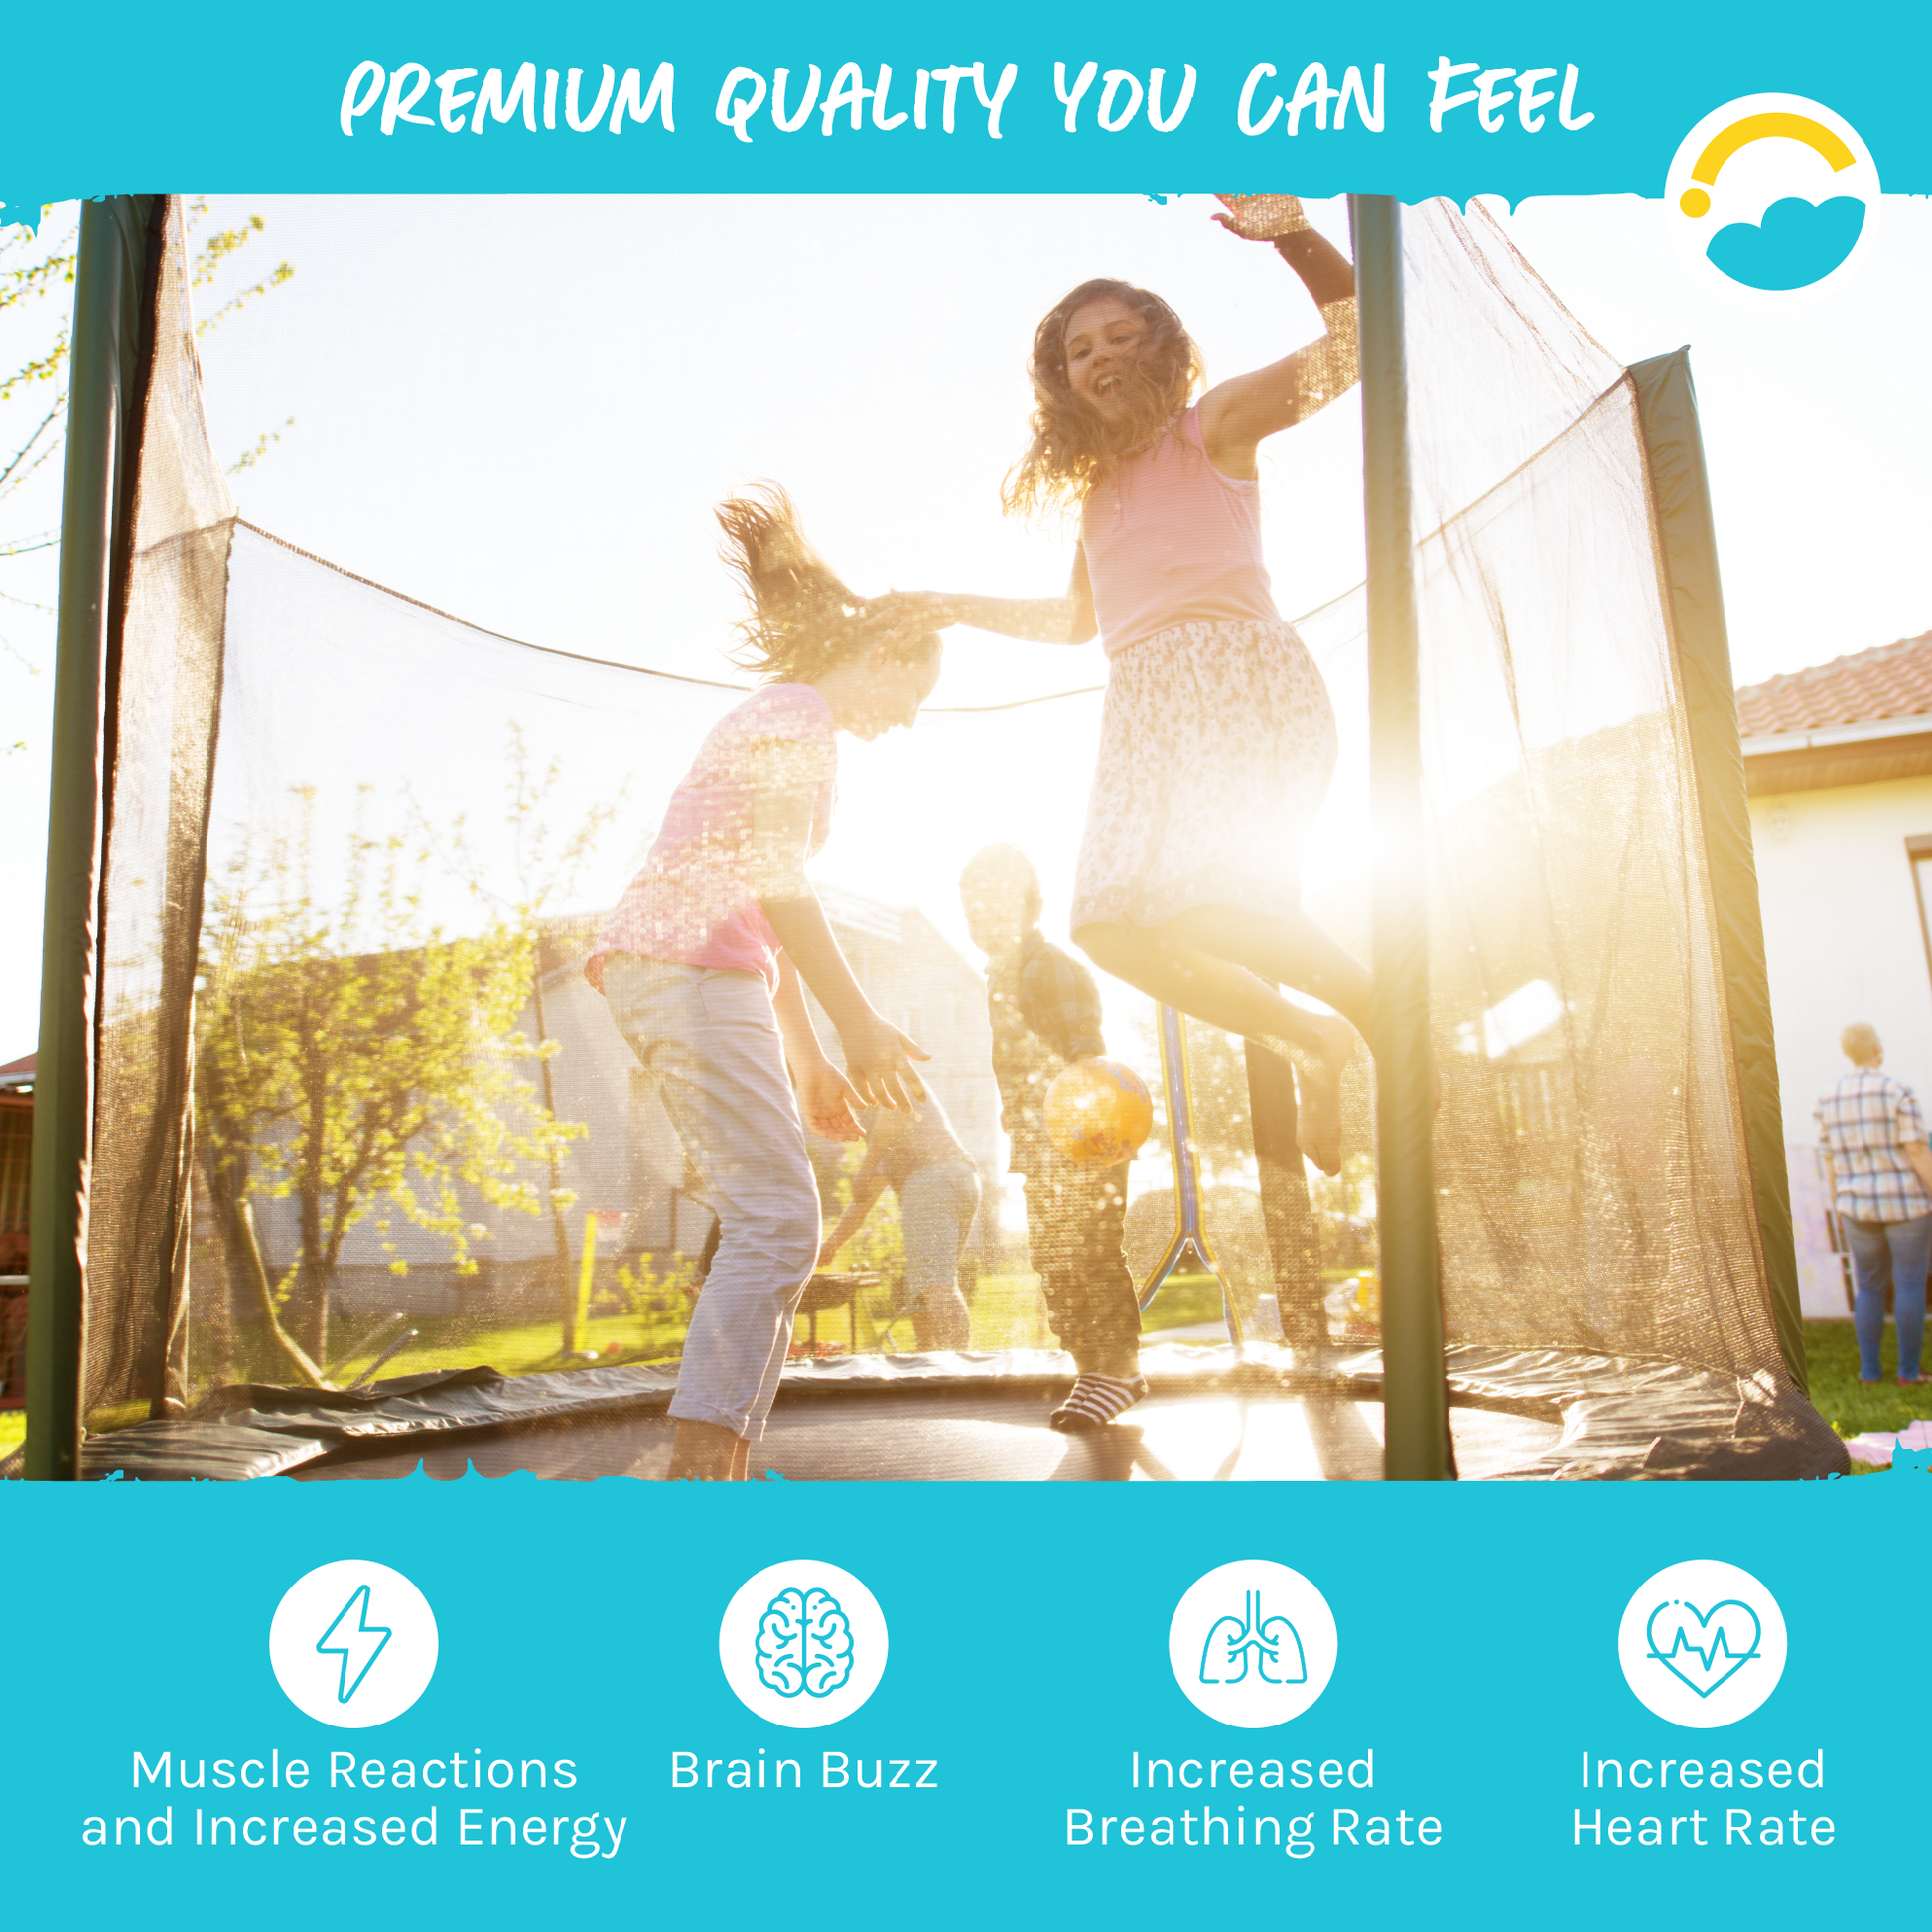 Kids jumping on a trampoline.  Premium Quality you can Feel:  Product with help with Muscle Reactions and Increased Energy, Brain Buzz, Increased Breathing Rate, and Increased Heart Rate.  